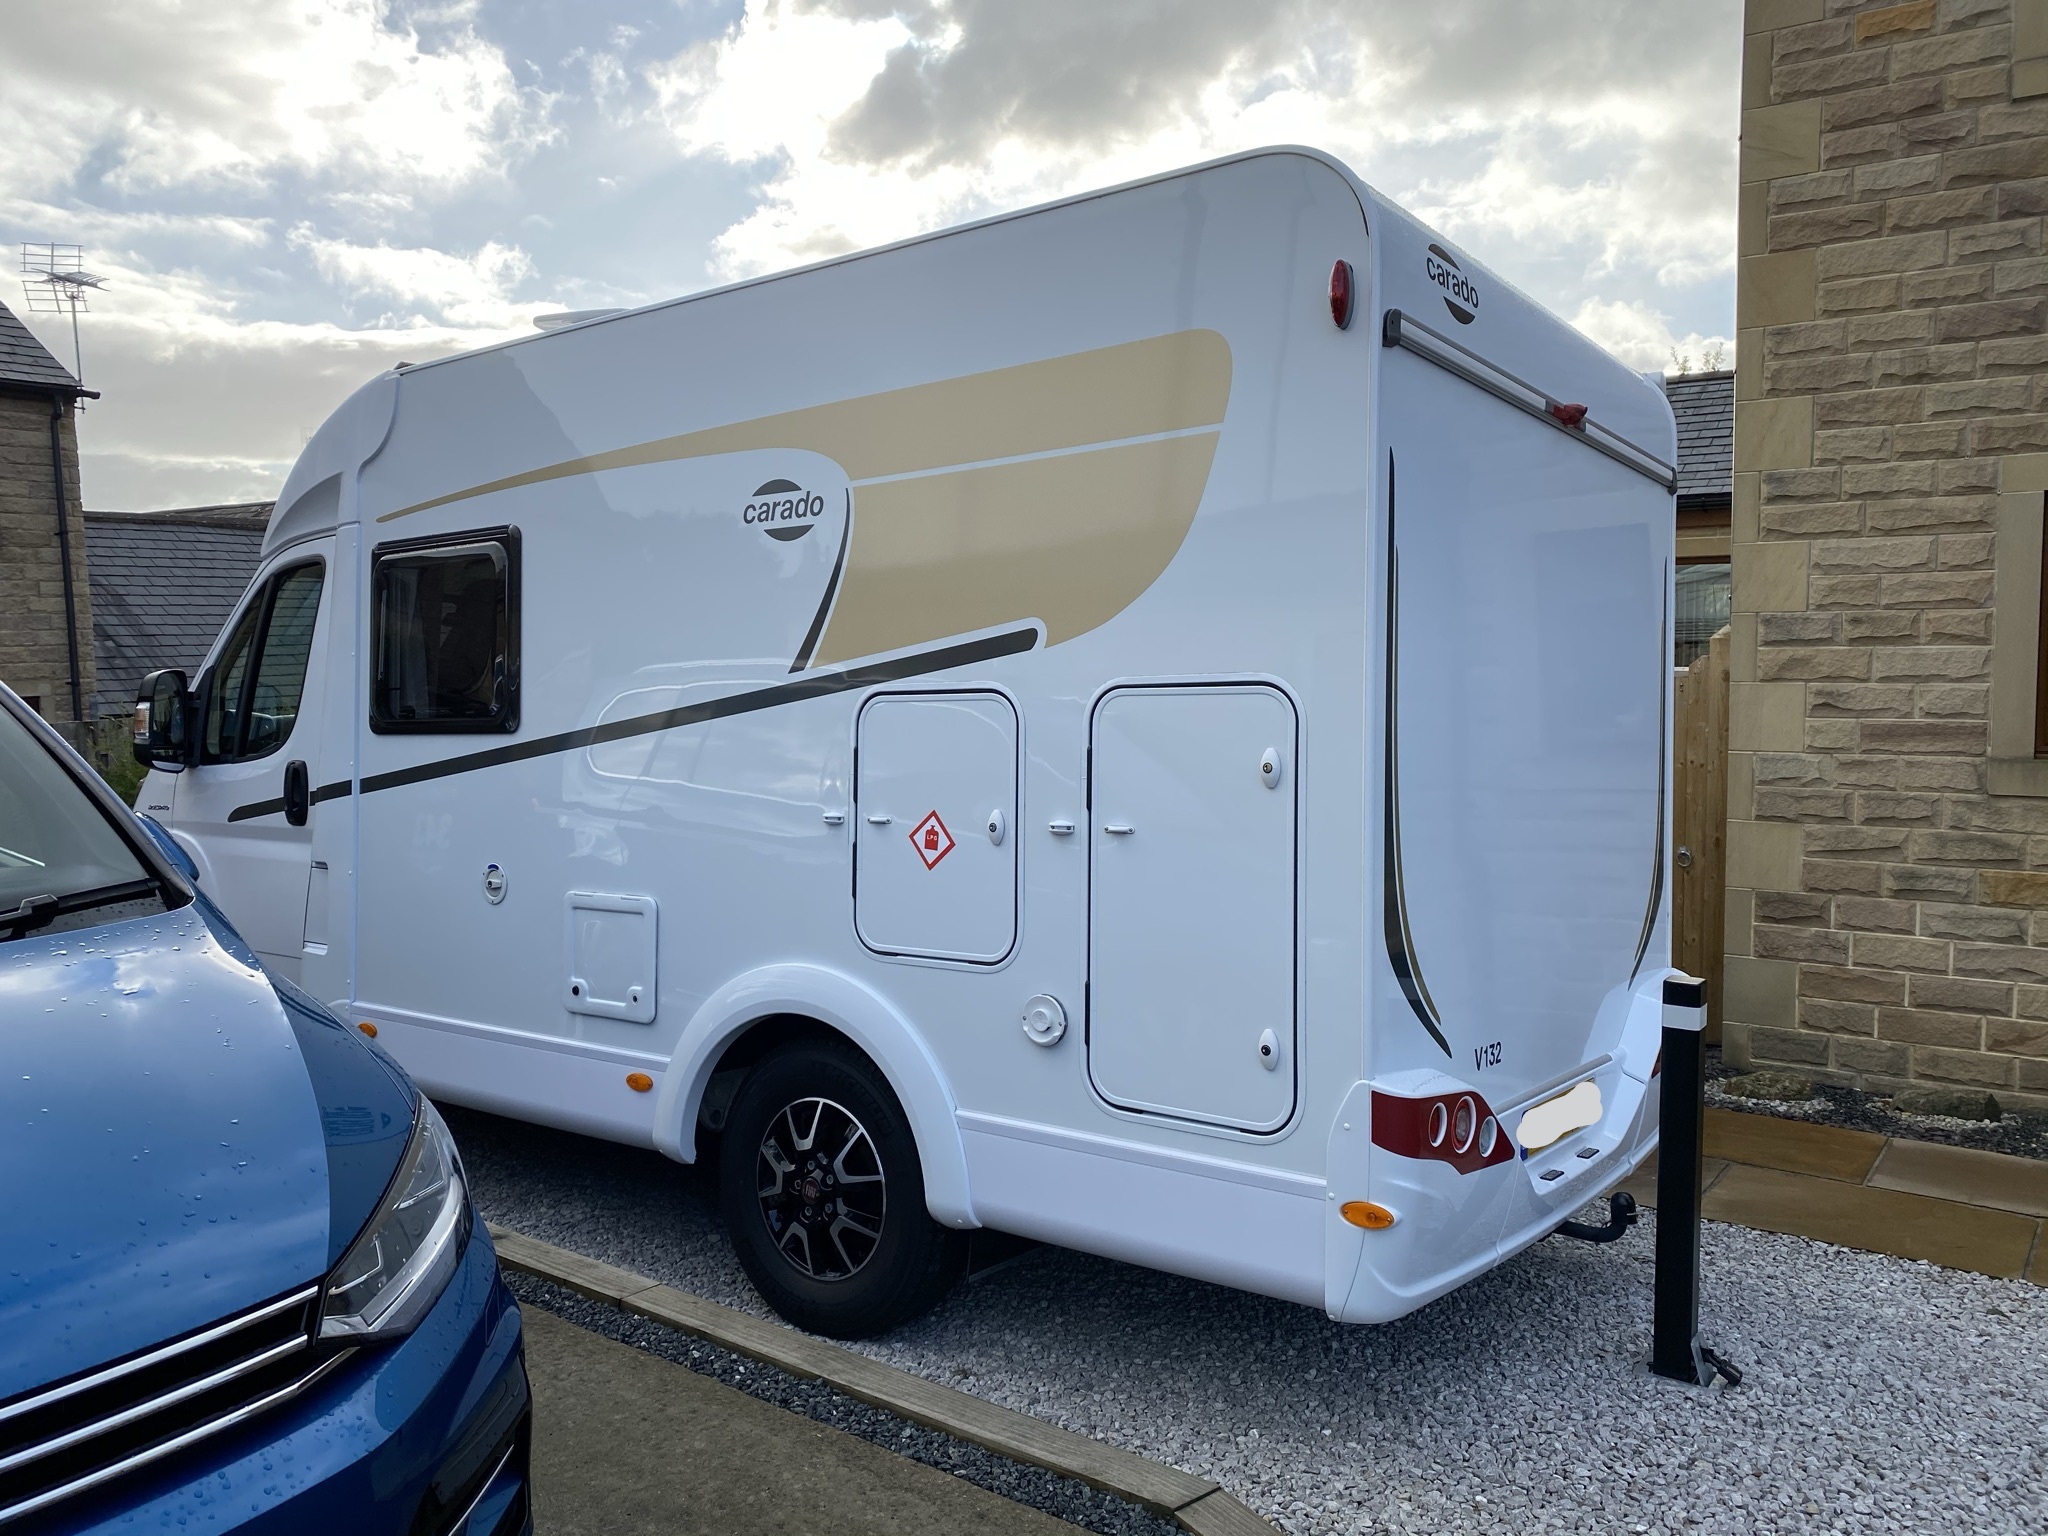 Storing your motorhome at home